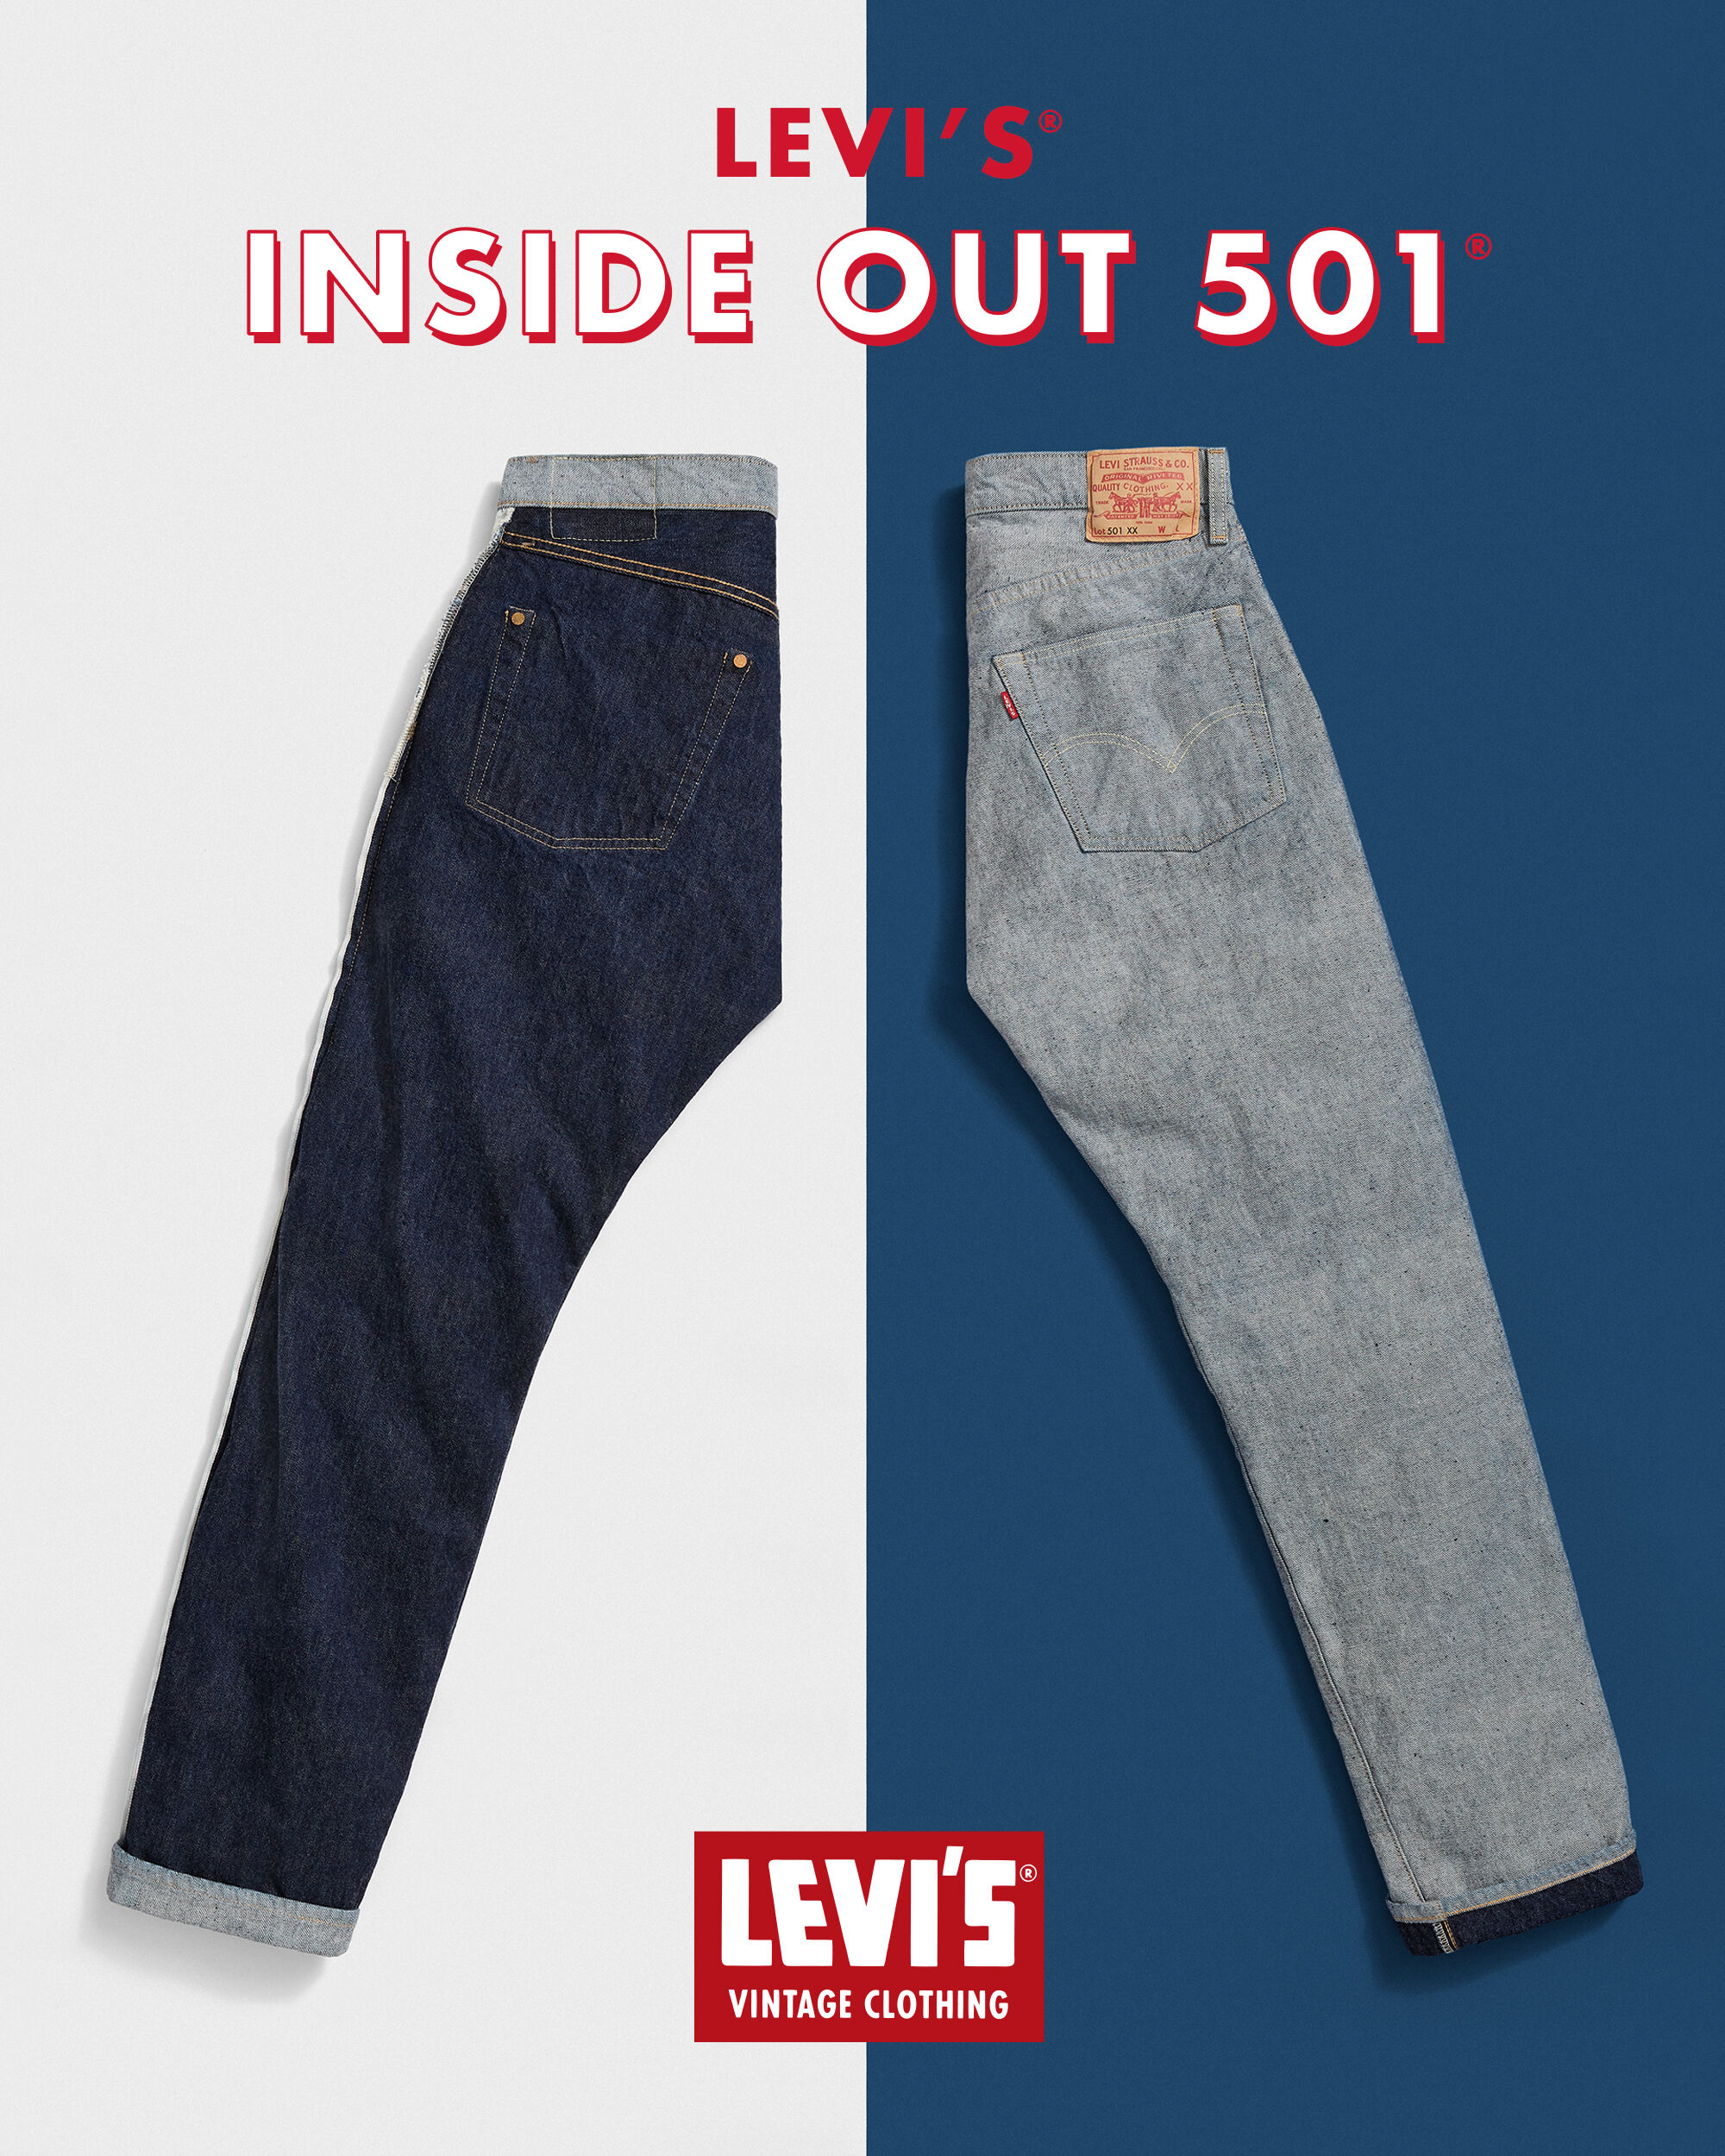 LIMITED EDITIONLEVI'S® VINTAGE CLOTHING INSIDE OUT 501